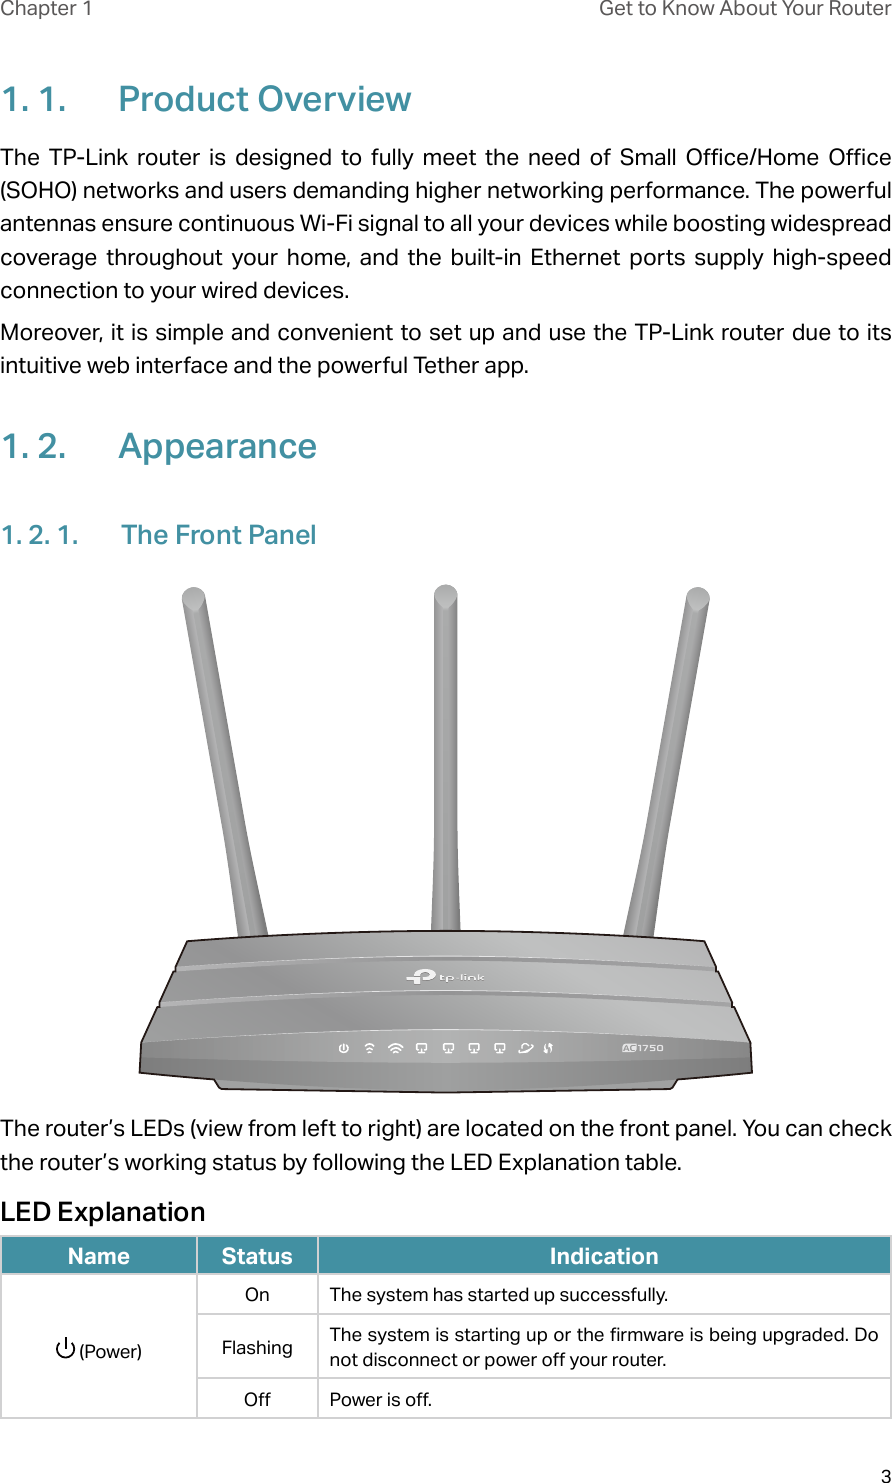 3Chapter 1 Get to Know About Your Router1. 1.  Product OverviewThe TP-Link router is designed to fully meet the need of Small Office/Home Office (SOHO) networks and users demanding higher networking performance. The powerful antennas ensure continuous Wi-Fi signal to all your devices while boosting widespread coverage throughout your home, and the built-in Ethernet ports supply high-speed connection to your wired devices.Moreover, it is simple and convenient to set up and use the TP-Link router due to its intuitive web interface and the powerful Tether app.  1. 2.  Appearance1. 2. 1.  The Front PanelThe router’s LEDs (view from left to right) are located on the front panel. You can check the router’s working status by following the LED Explanation table.LED ExplanationName Status Indication (Power)On The system has started up successfully.Flashing The system is starting up or the firmware is being upgraded. Do not disconnect or power off your router.Off Power is off. 